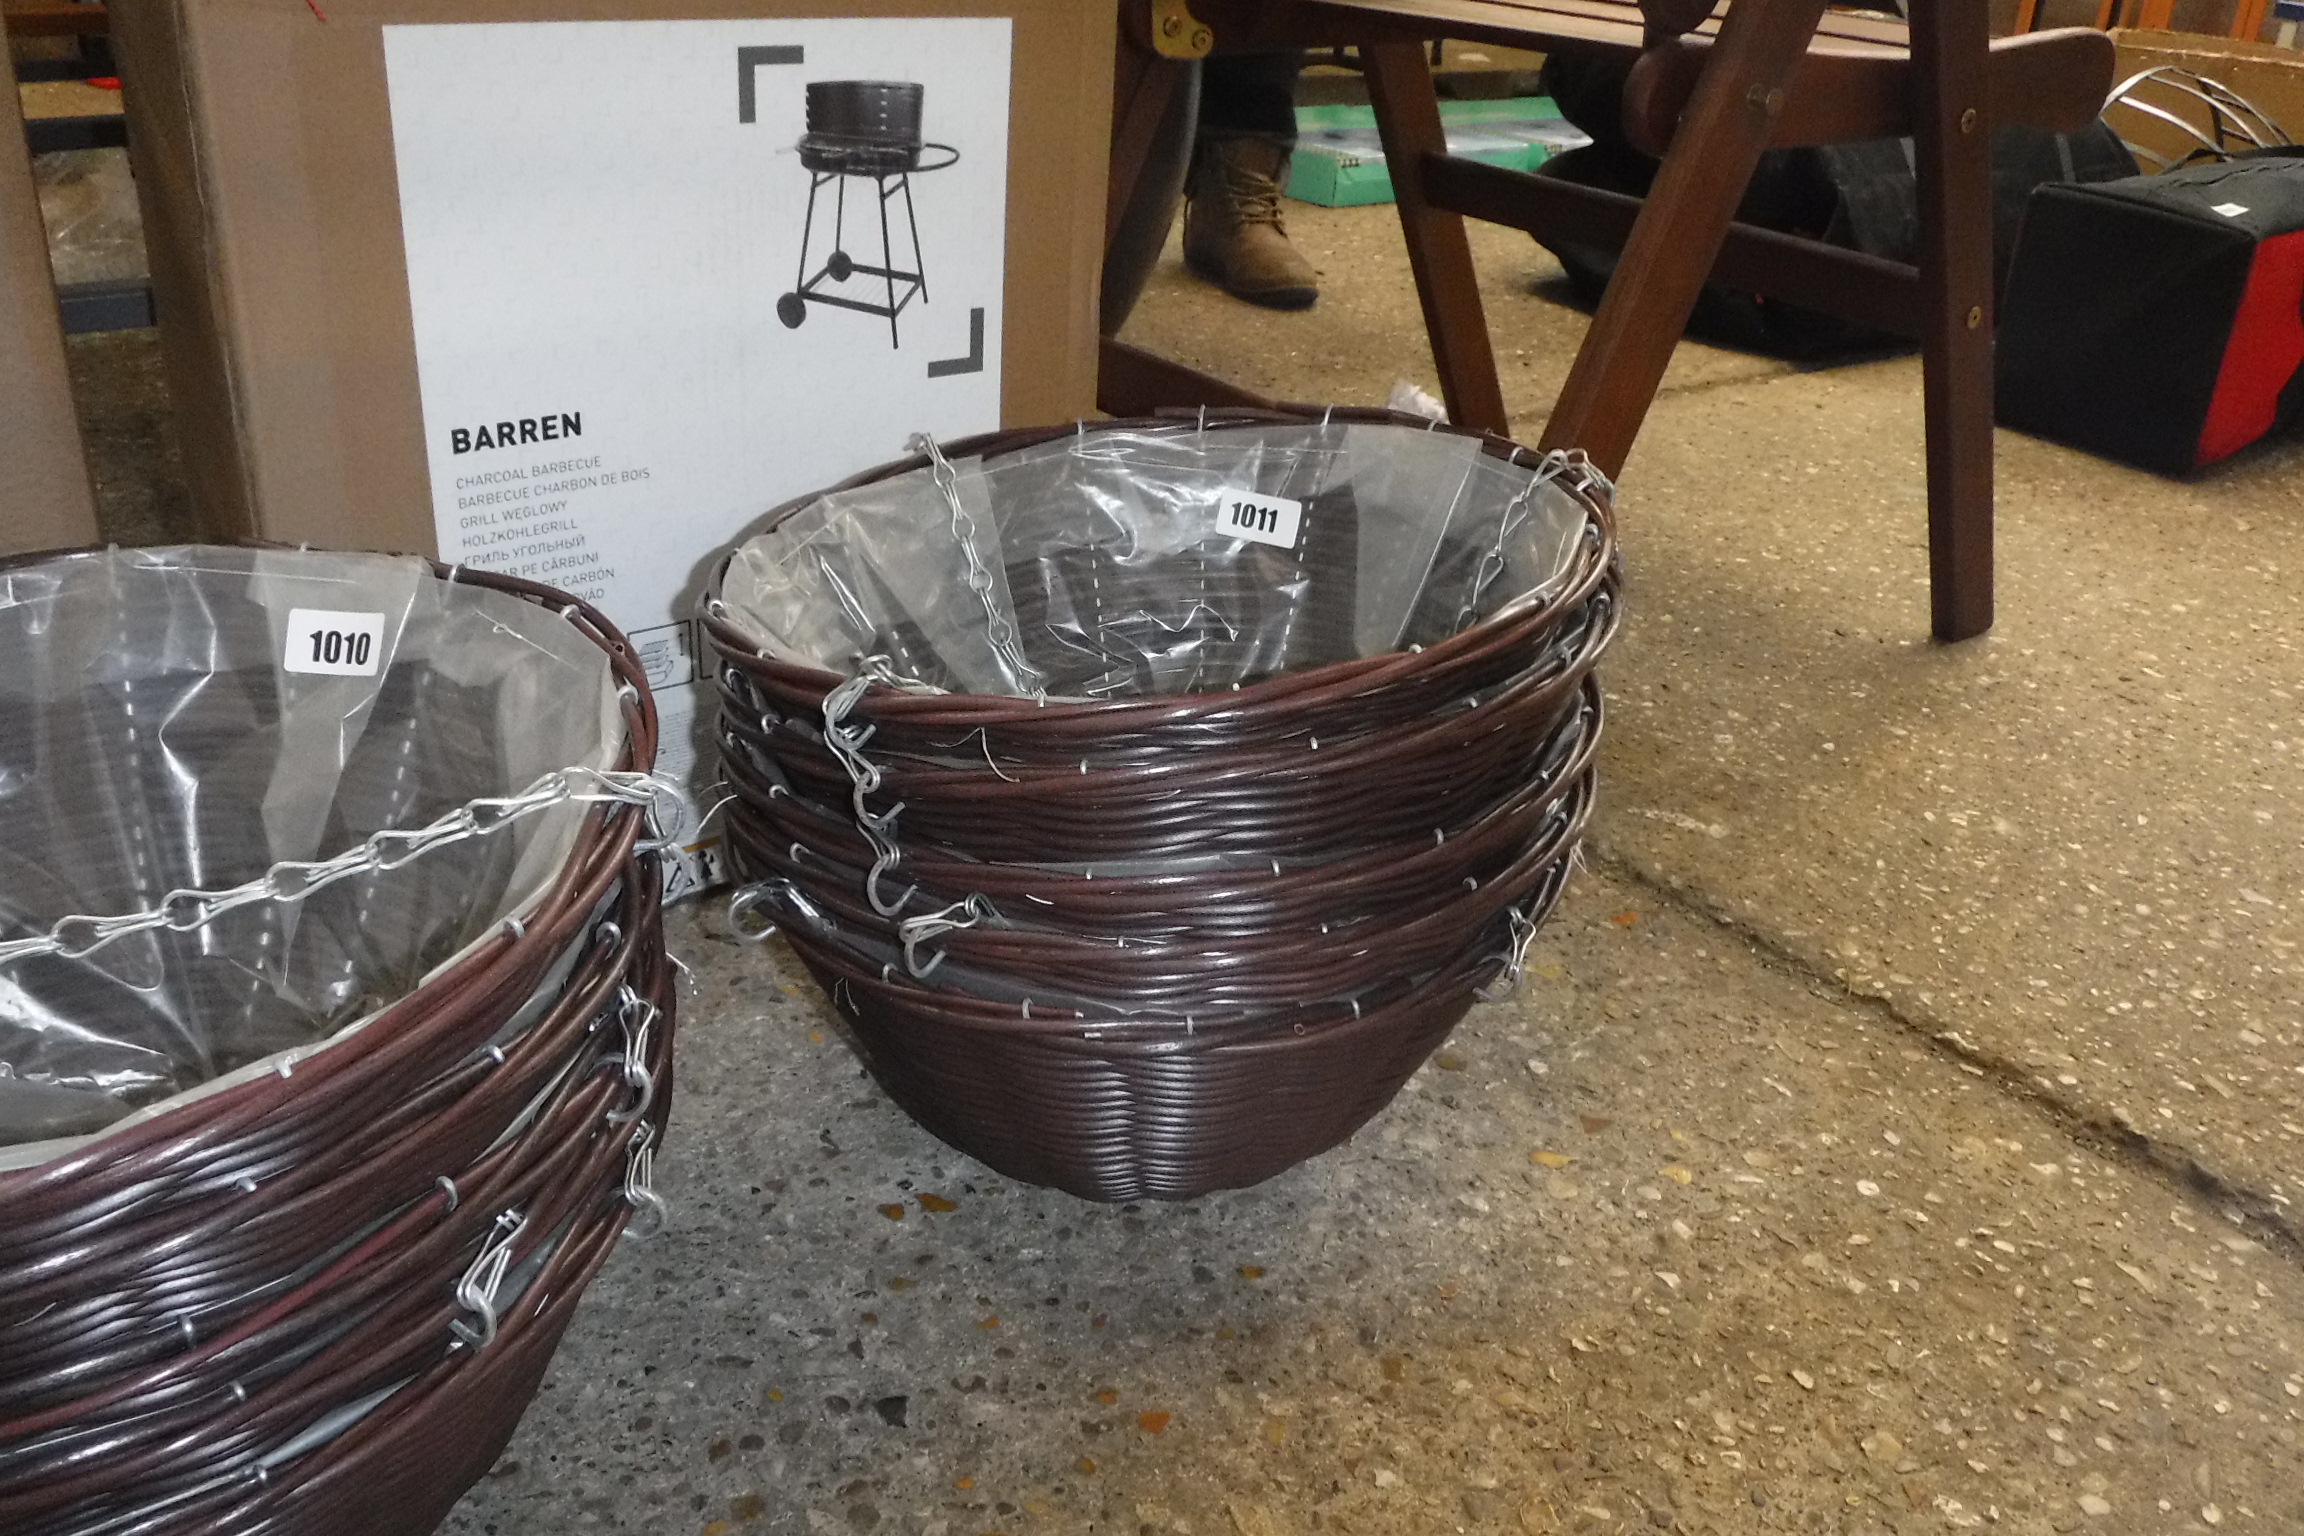 Stack of 5 brown rattan effect 14'' hanging baskets